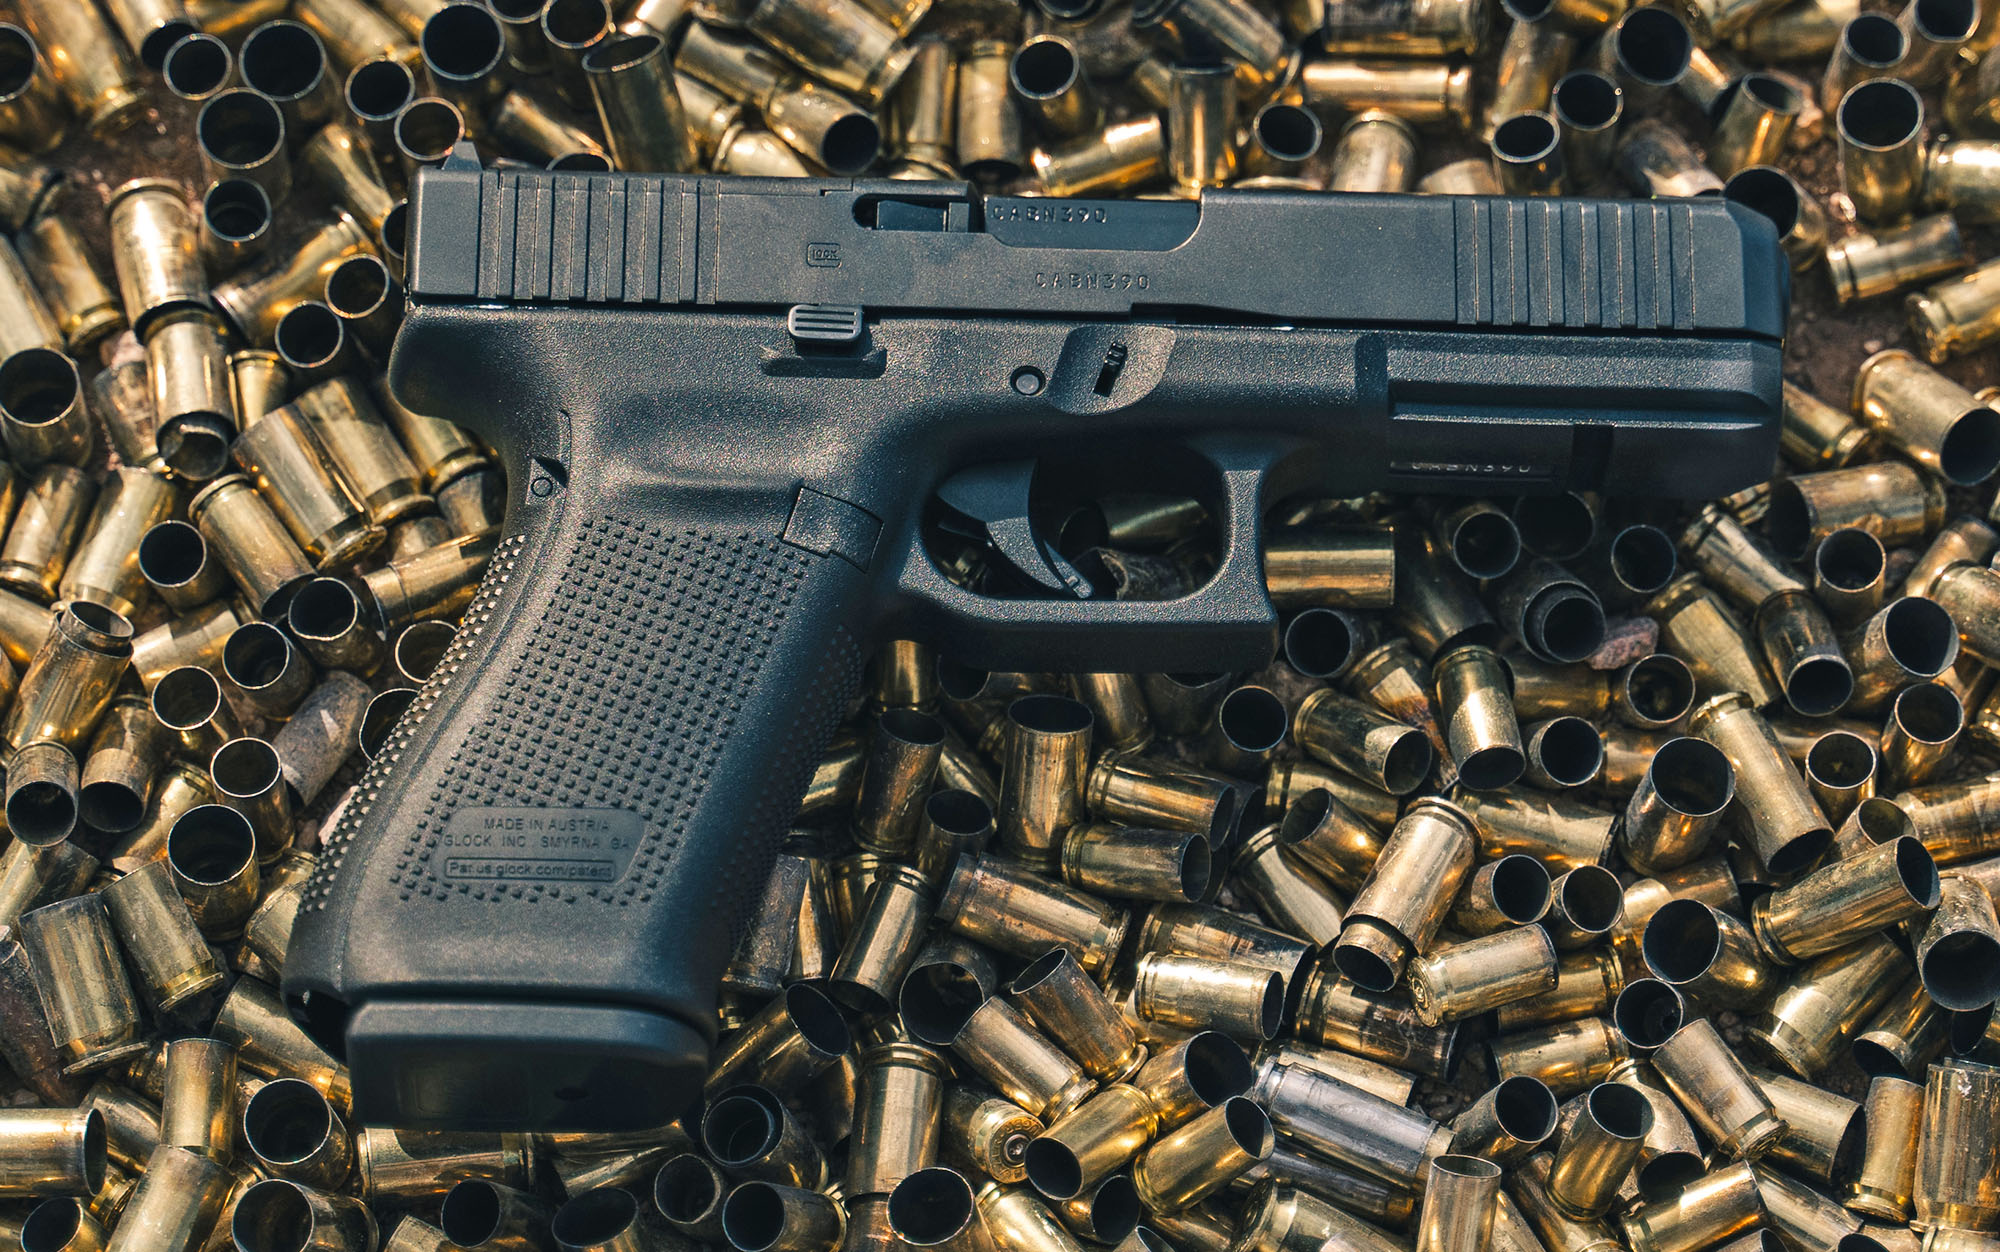 We tested the Glock Gen 5 G20.